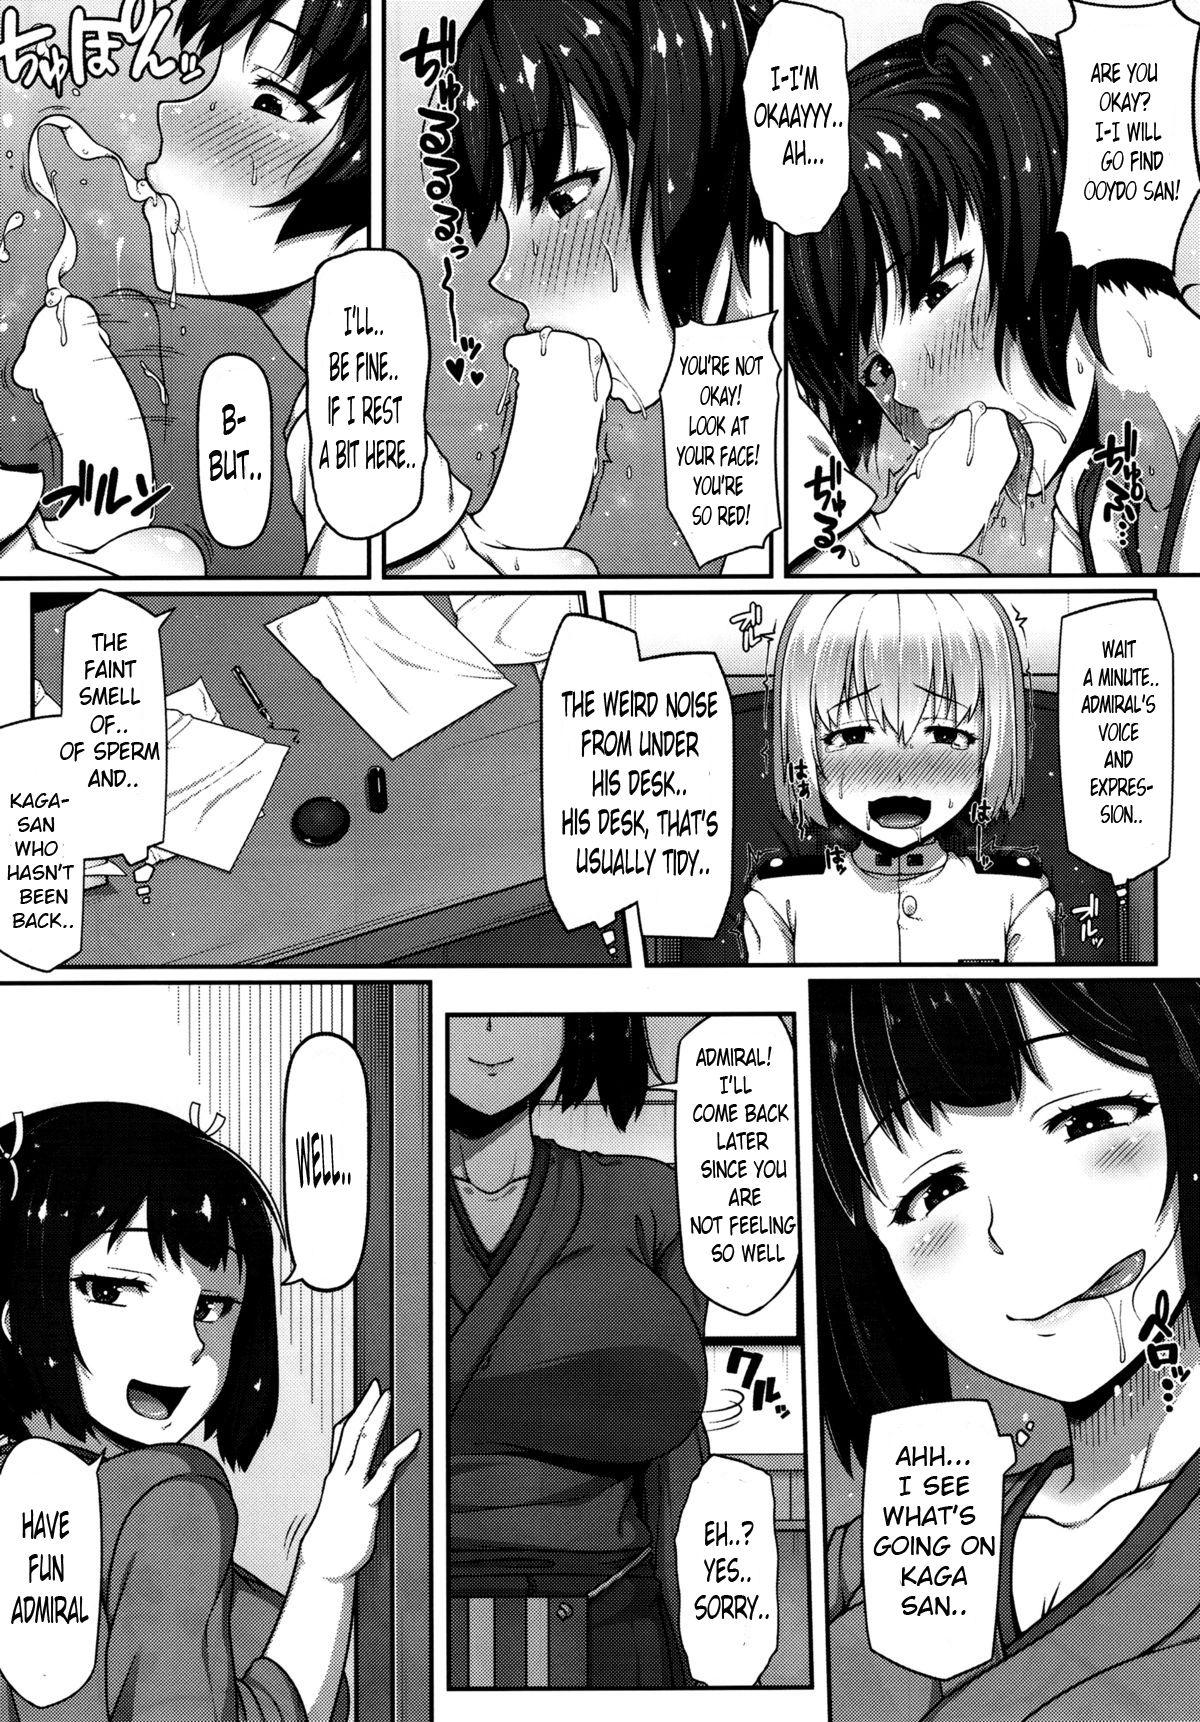 Kagasan is an Even More Perverted Sister 8